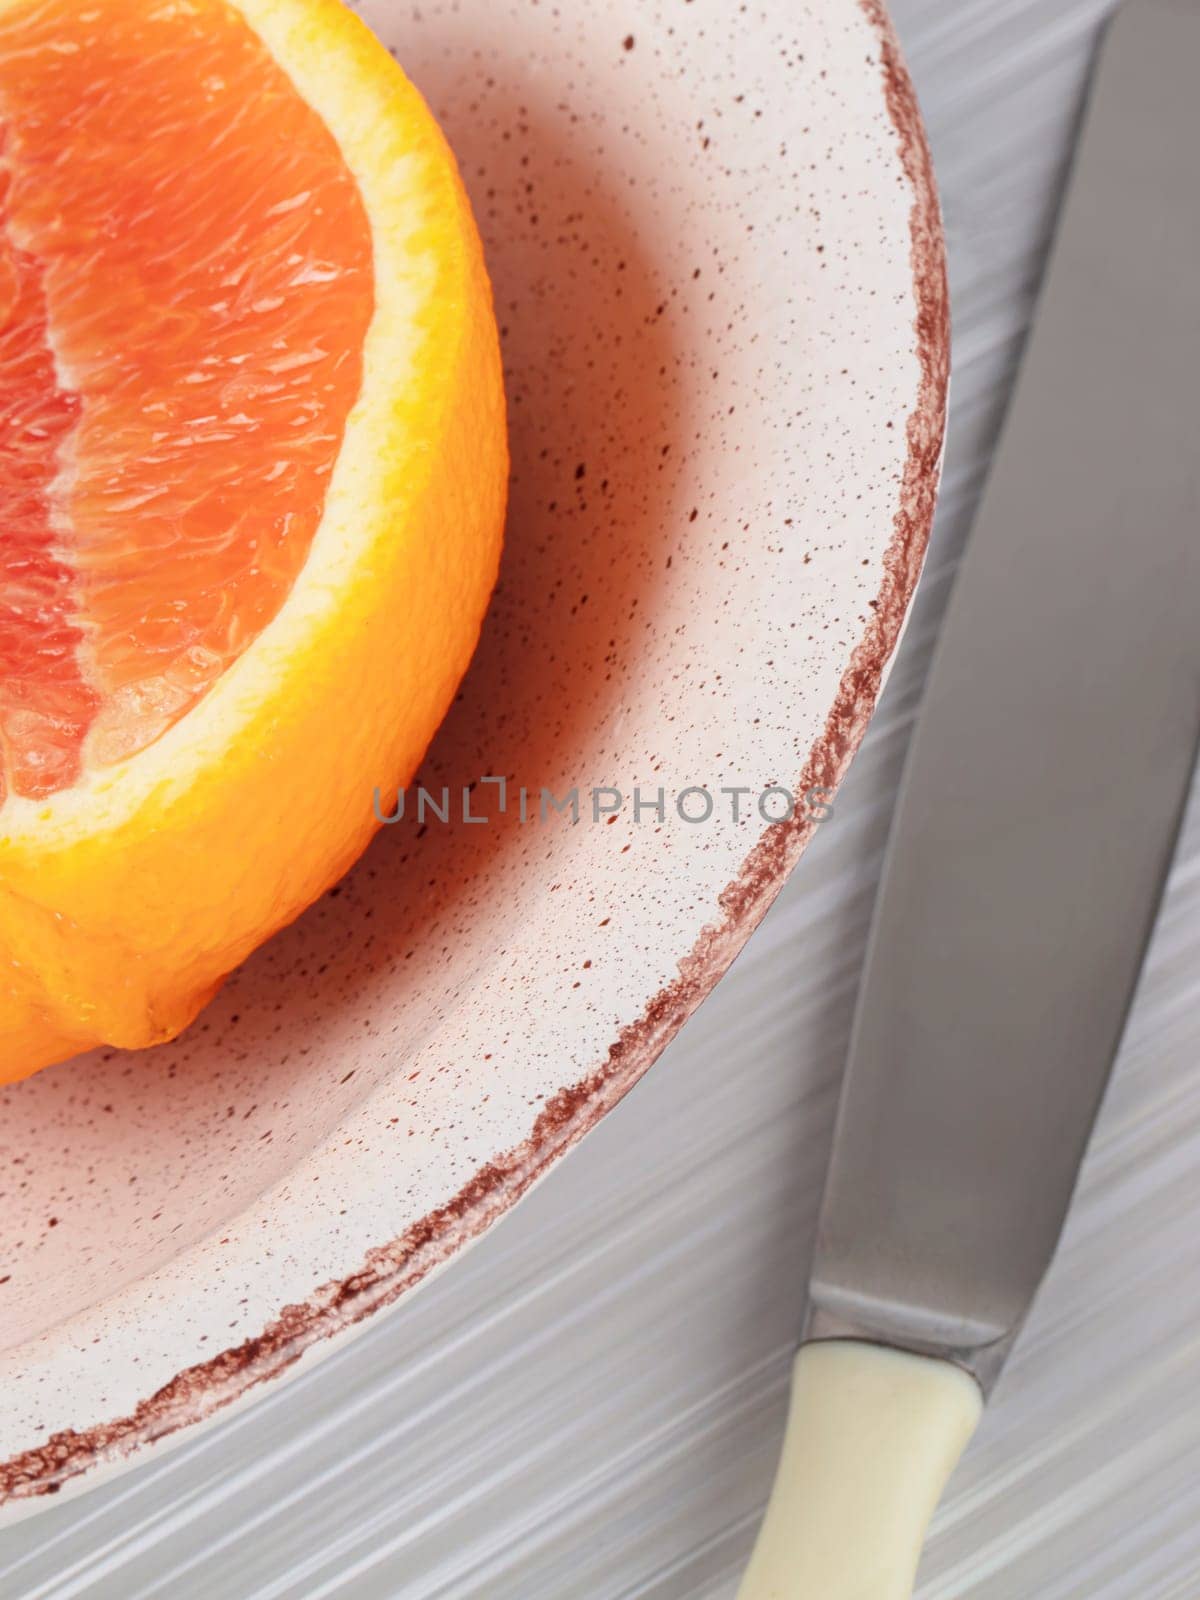 Part of a plate with half a grapefruit and a table knife. Photographed vertically. by Sviatlana